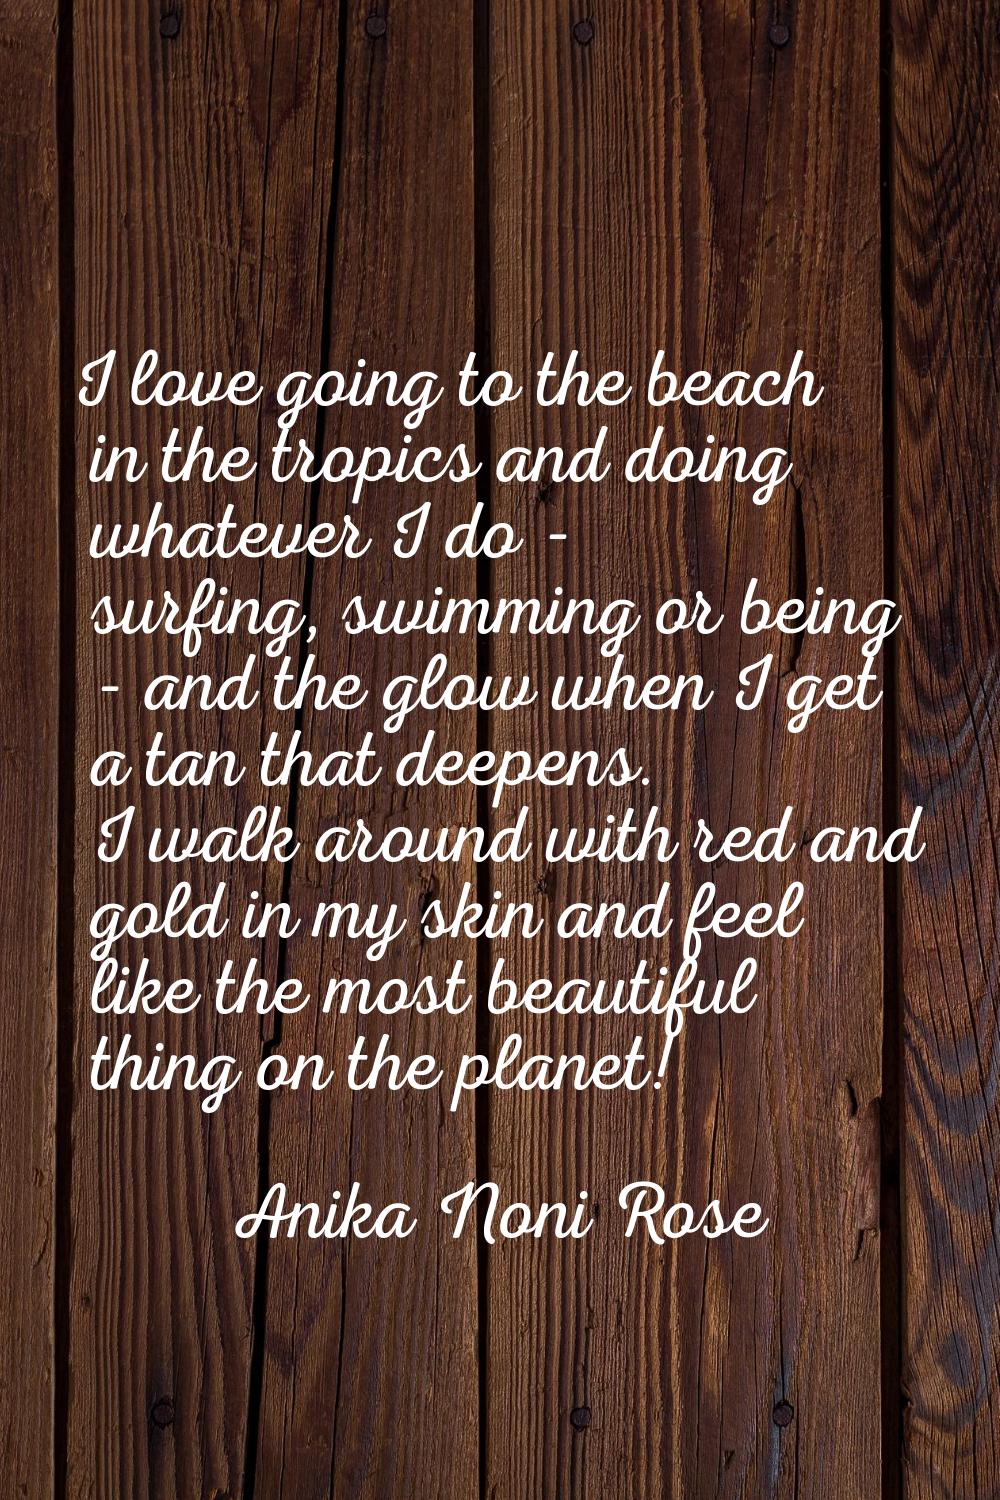 I love going to the beach in the tropics and doing whatever I do - surfing, swimming or being - and